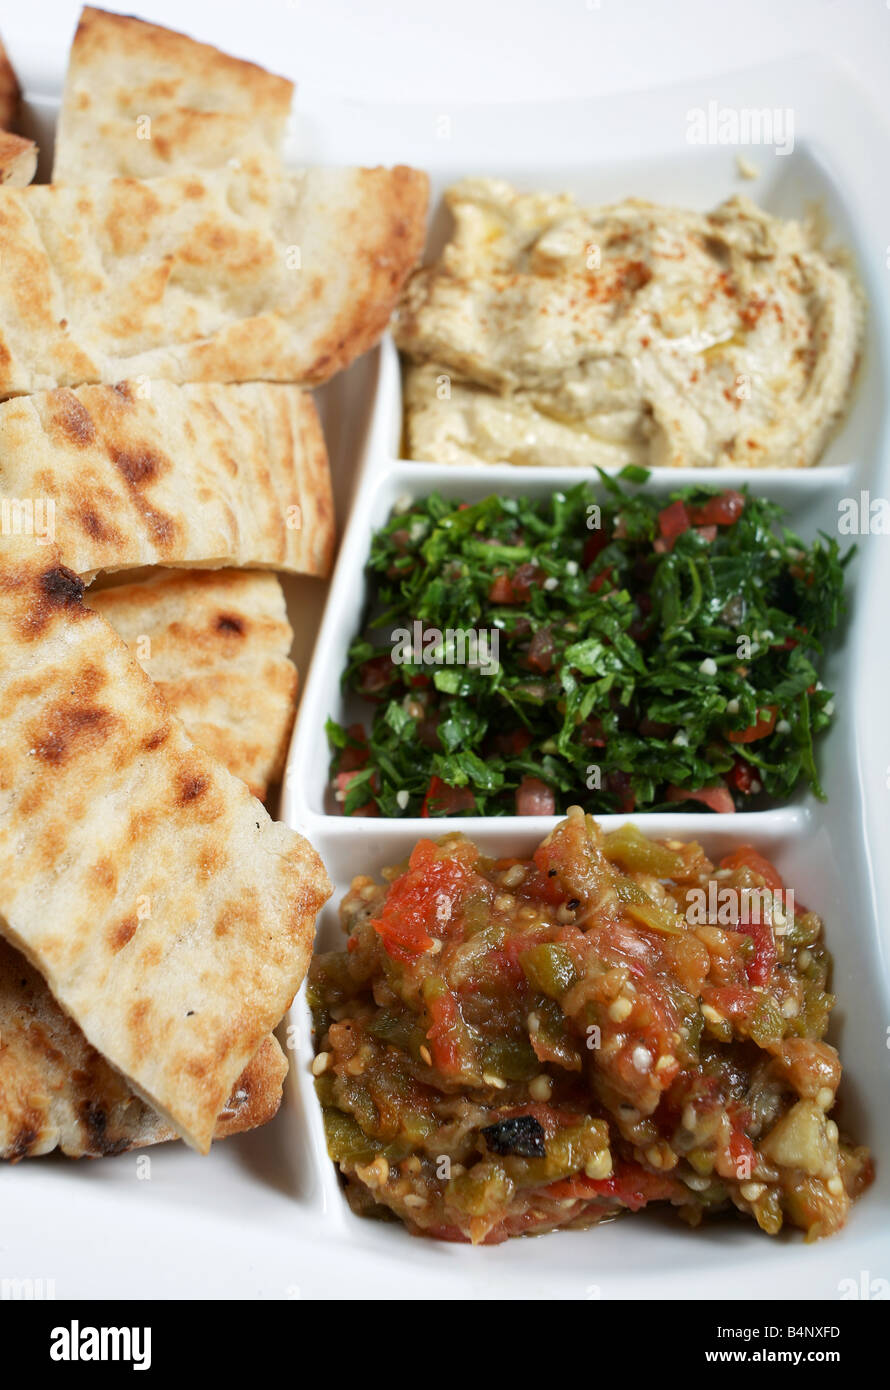 Traditional Arab or Mediterranean mezze with Turkish flat bread From the front babaganoush tabouleh and hummus Stock Photo